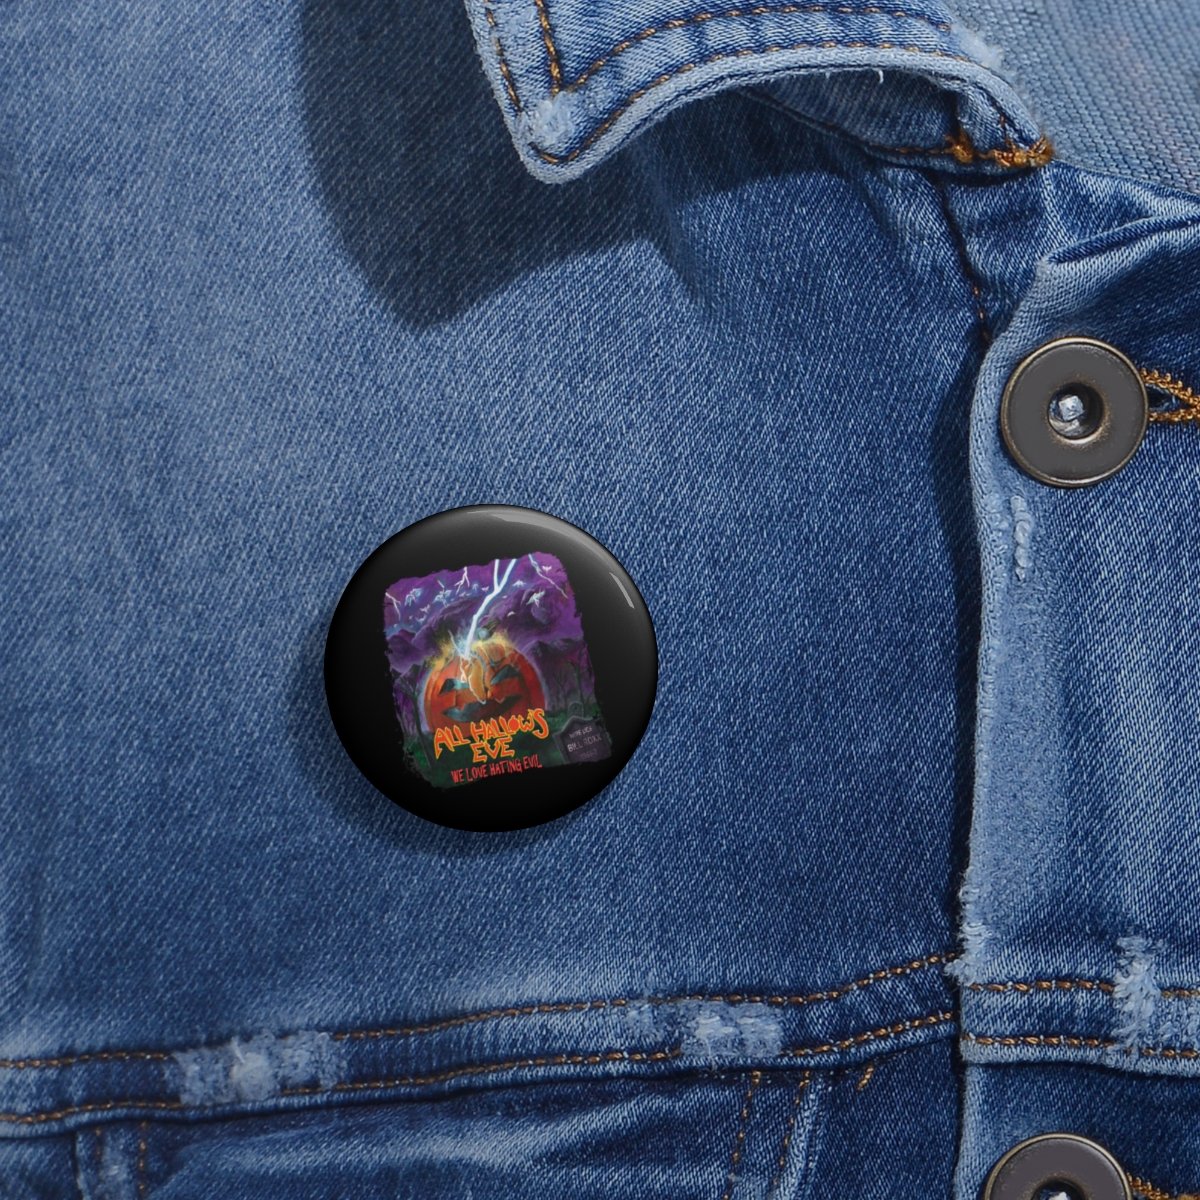 Roxx Productions – All Hallow’s Eve Pin Buttons